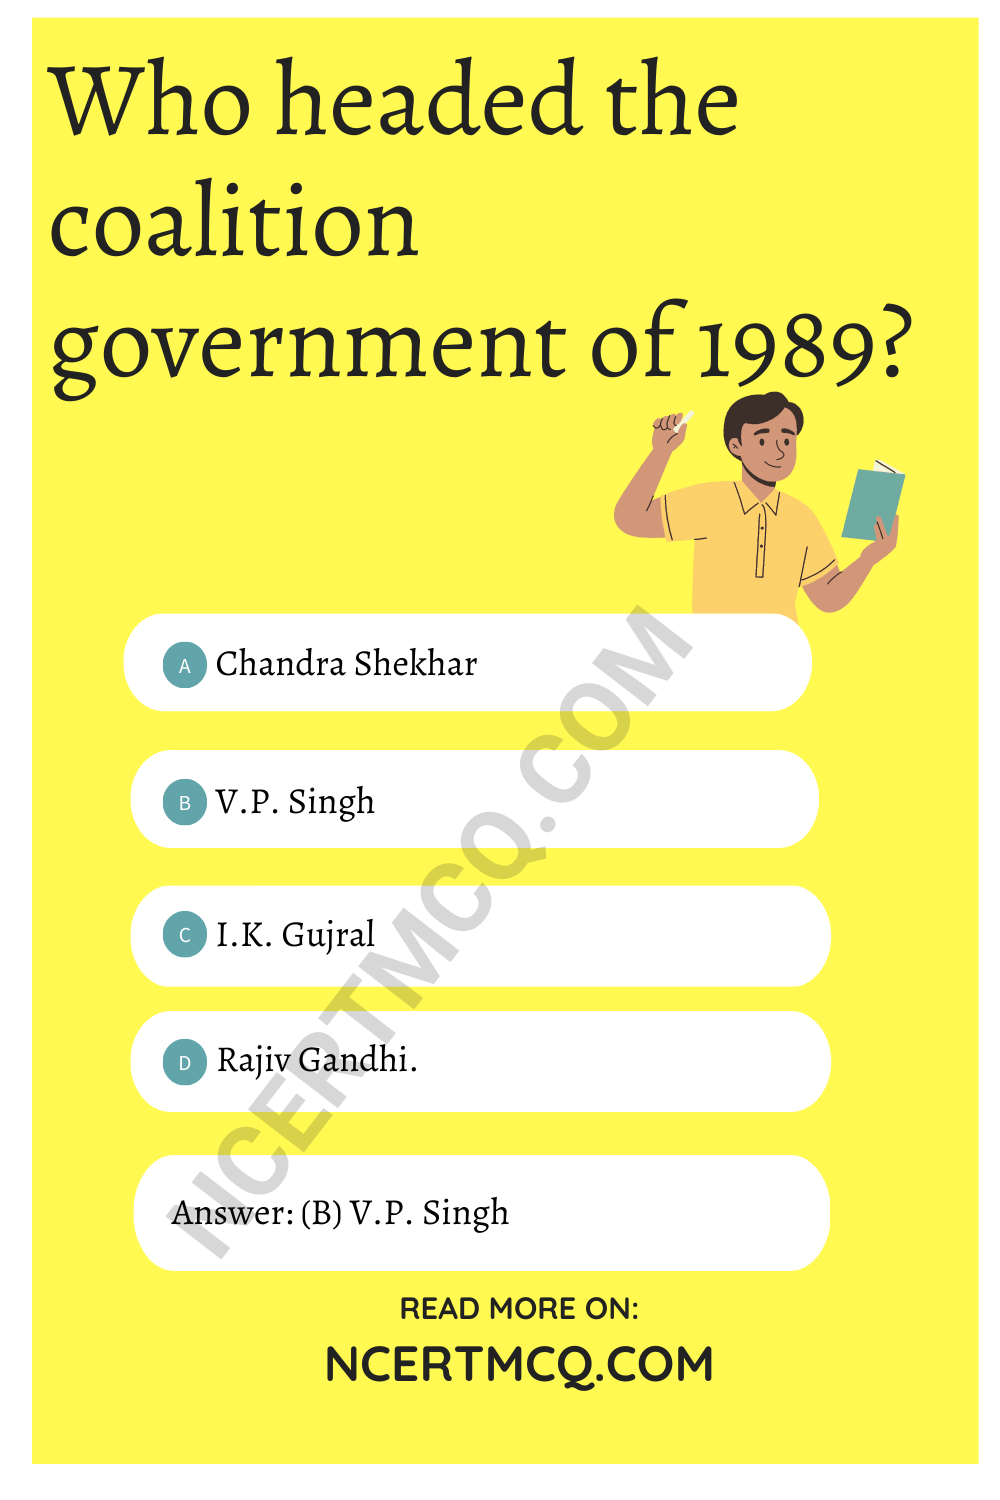 Who headed the coalition government of 1989?